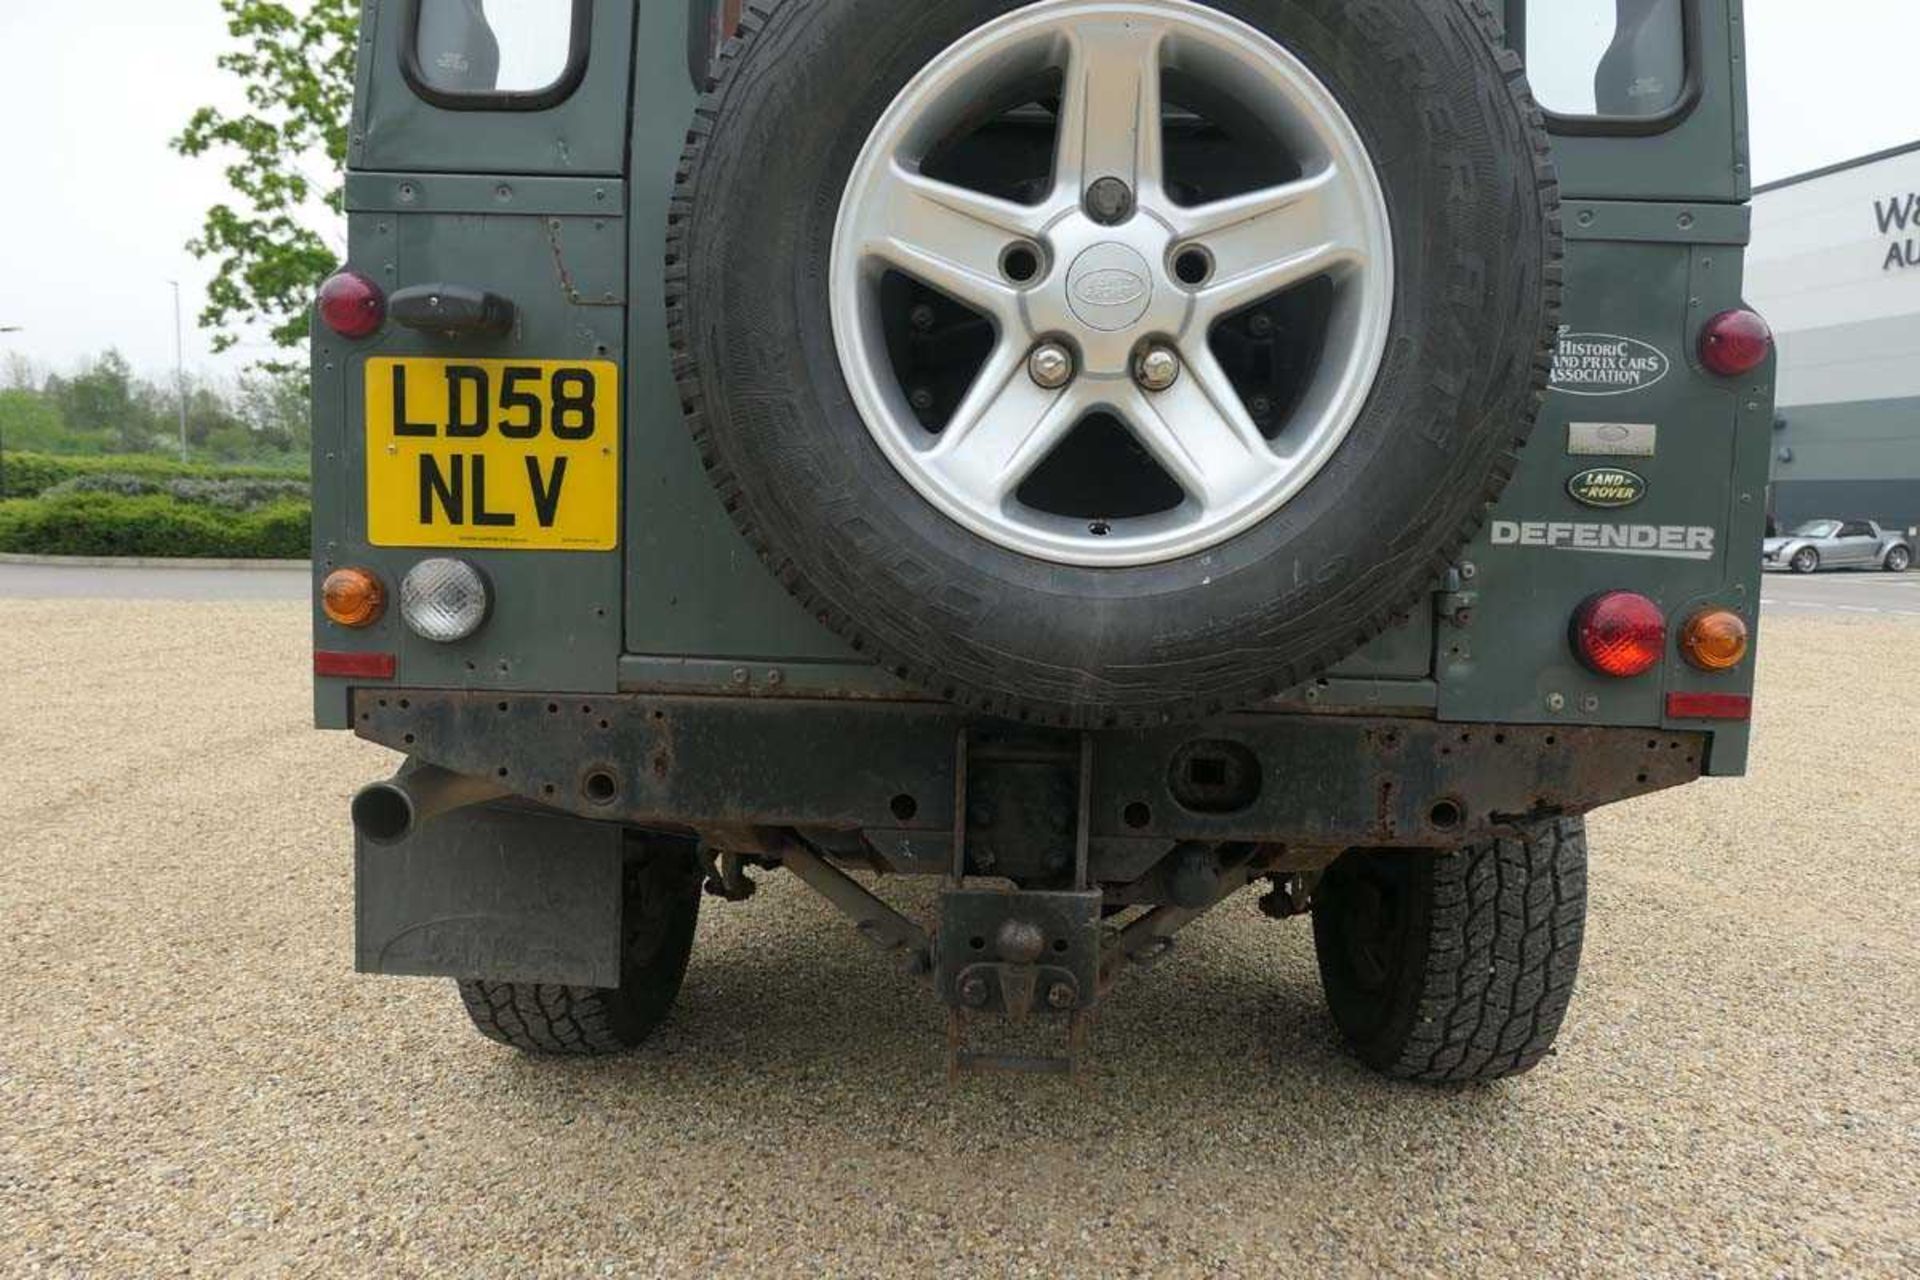 (LD58 NLV) 2008 Land Rover Defender 110 LWB station wagon estate in green, 2402cc diesel, 6-speed - Image 14 of 20